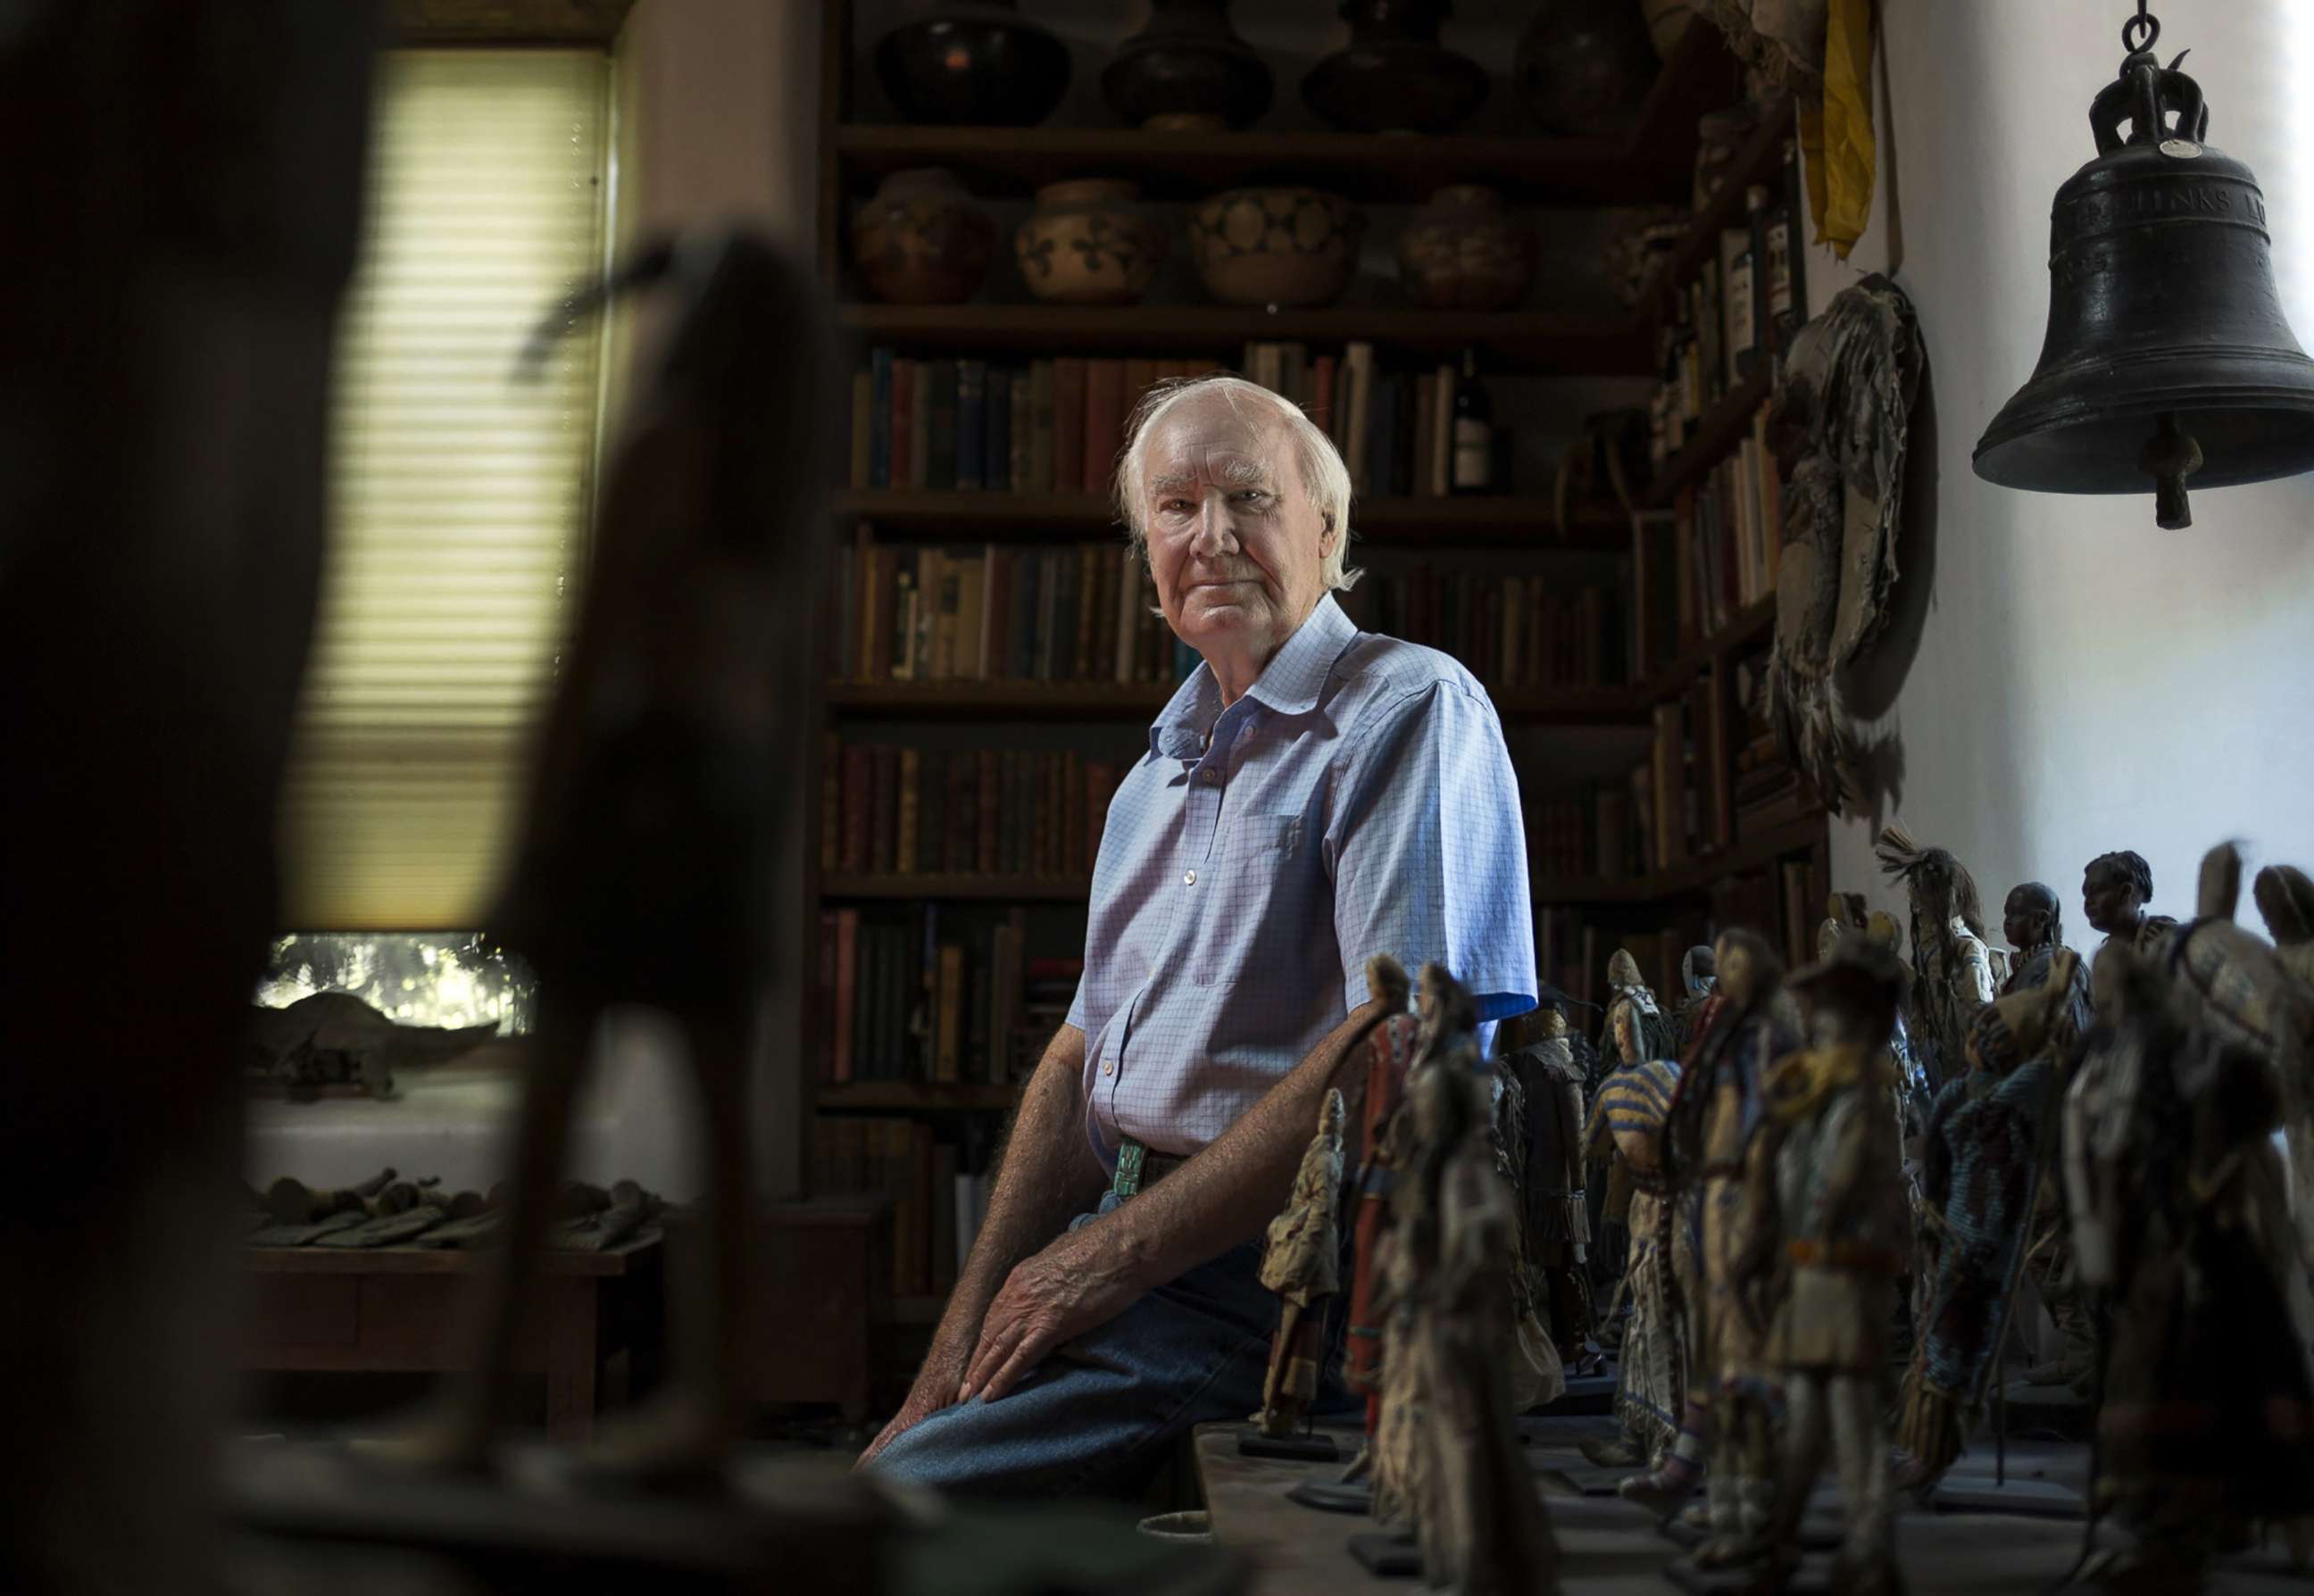 PHOTO: Forrest Fenn, an art collector, poses for a portrait at his home in Santa Fe, N.M., on June 17, 2016.